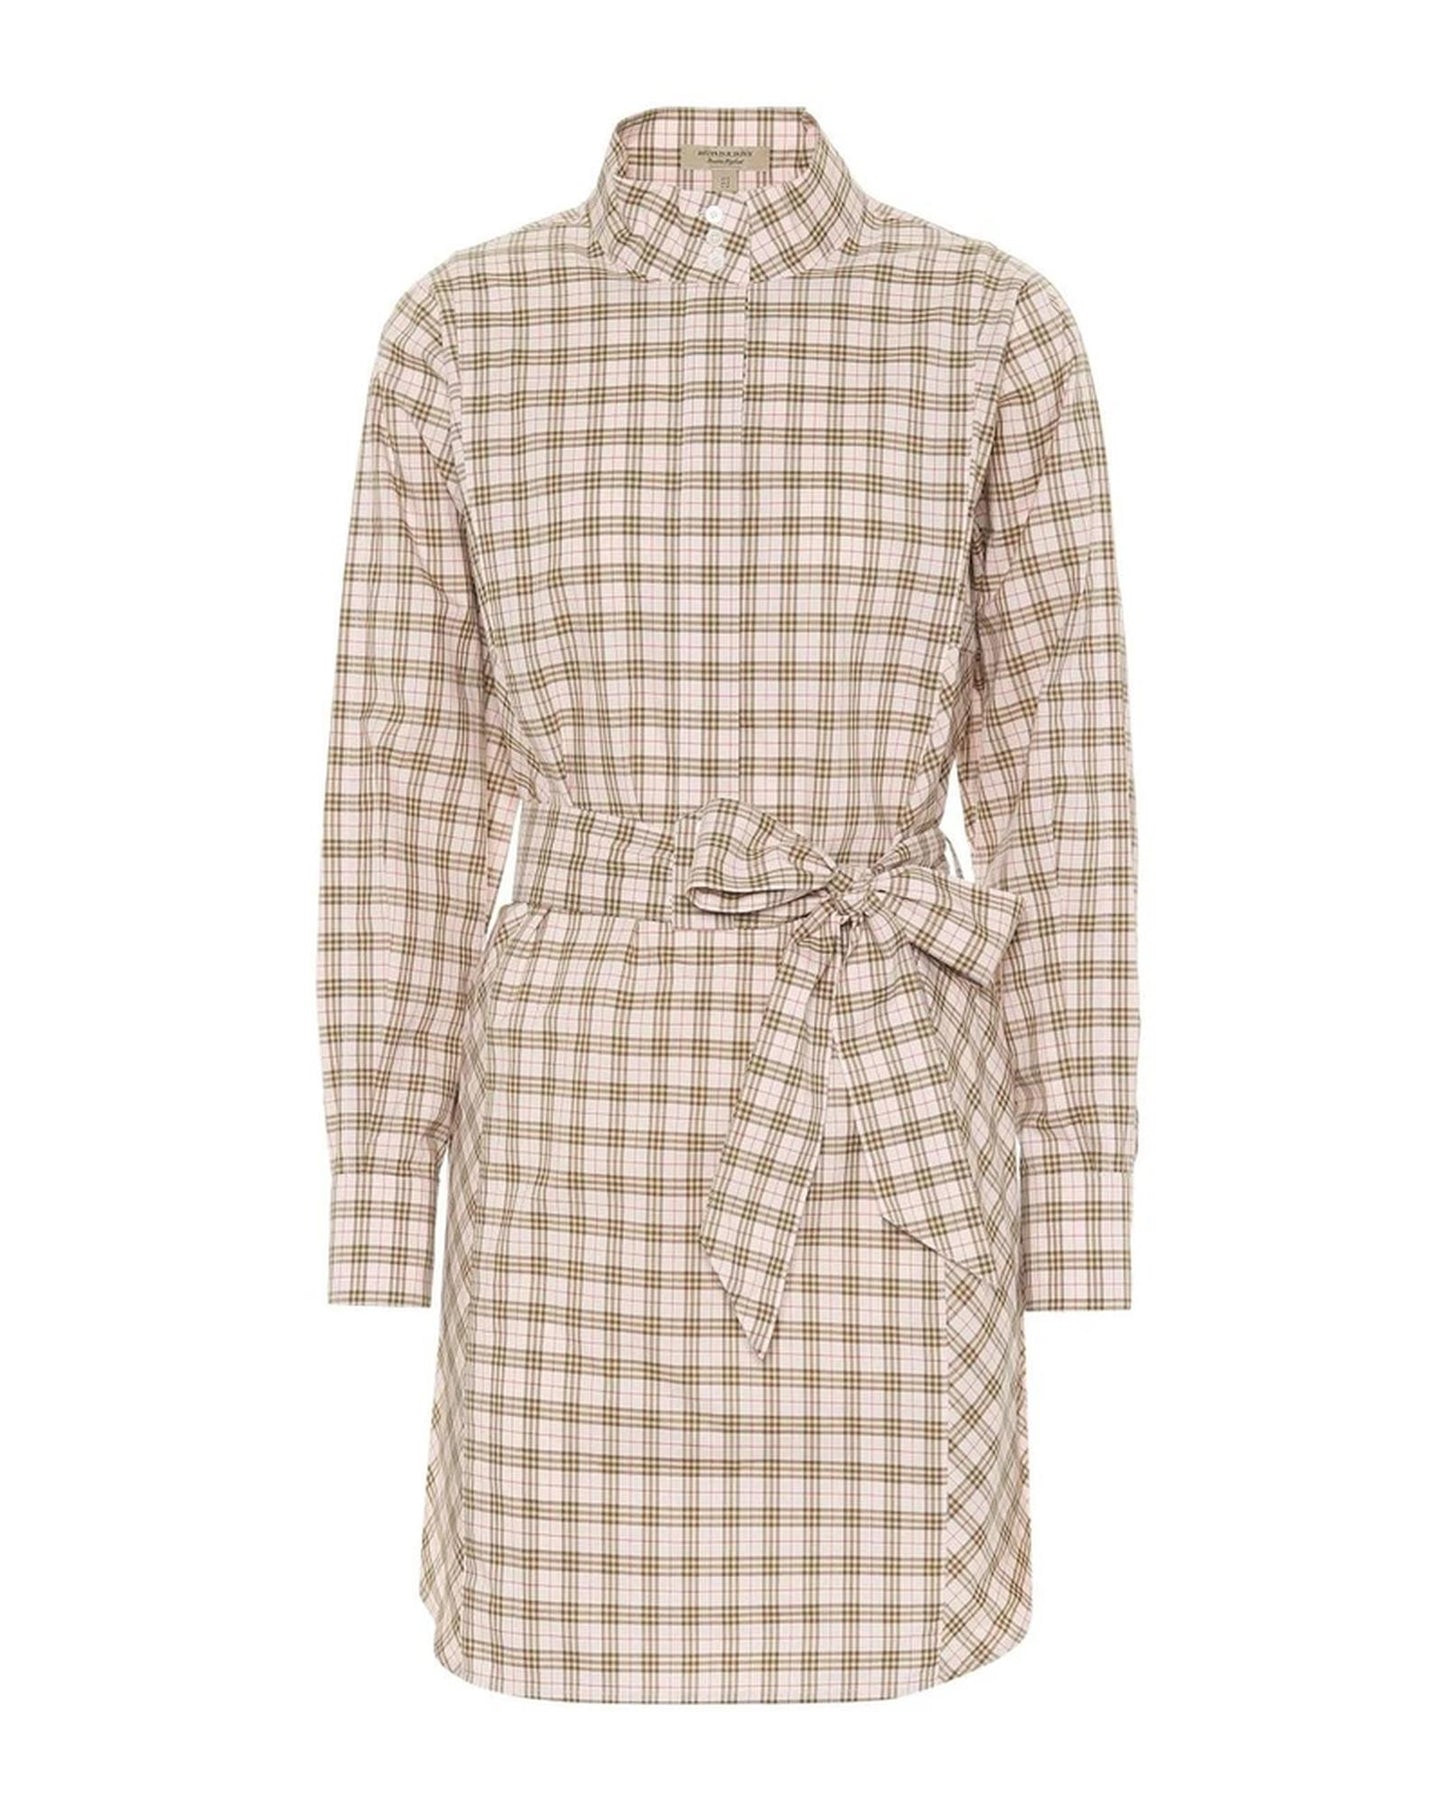 Iconic Check Cotton Shirt Dress with Long Sleeves and Belt 44 IT Women